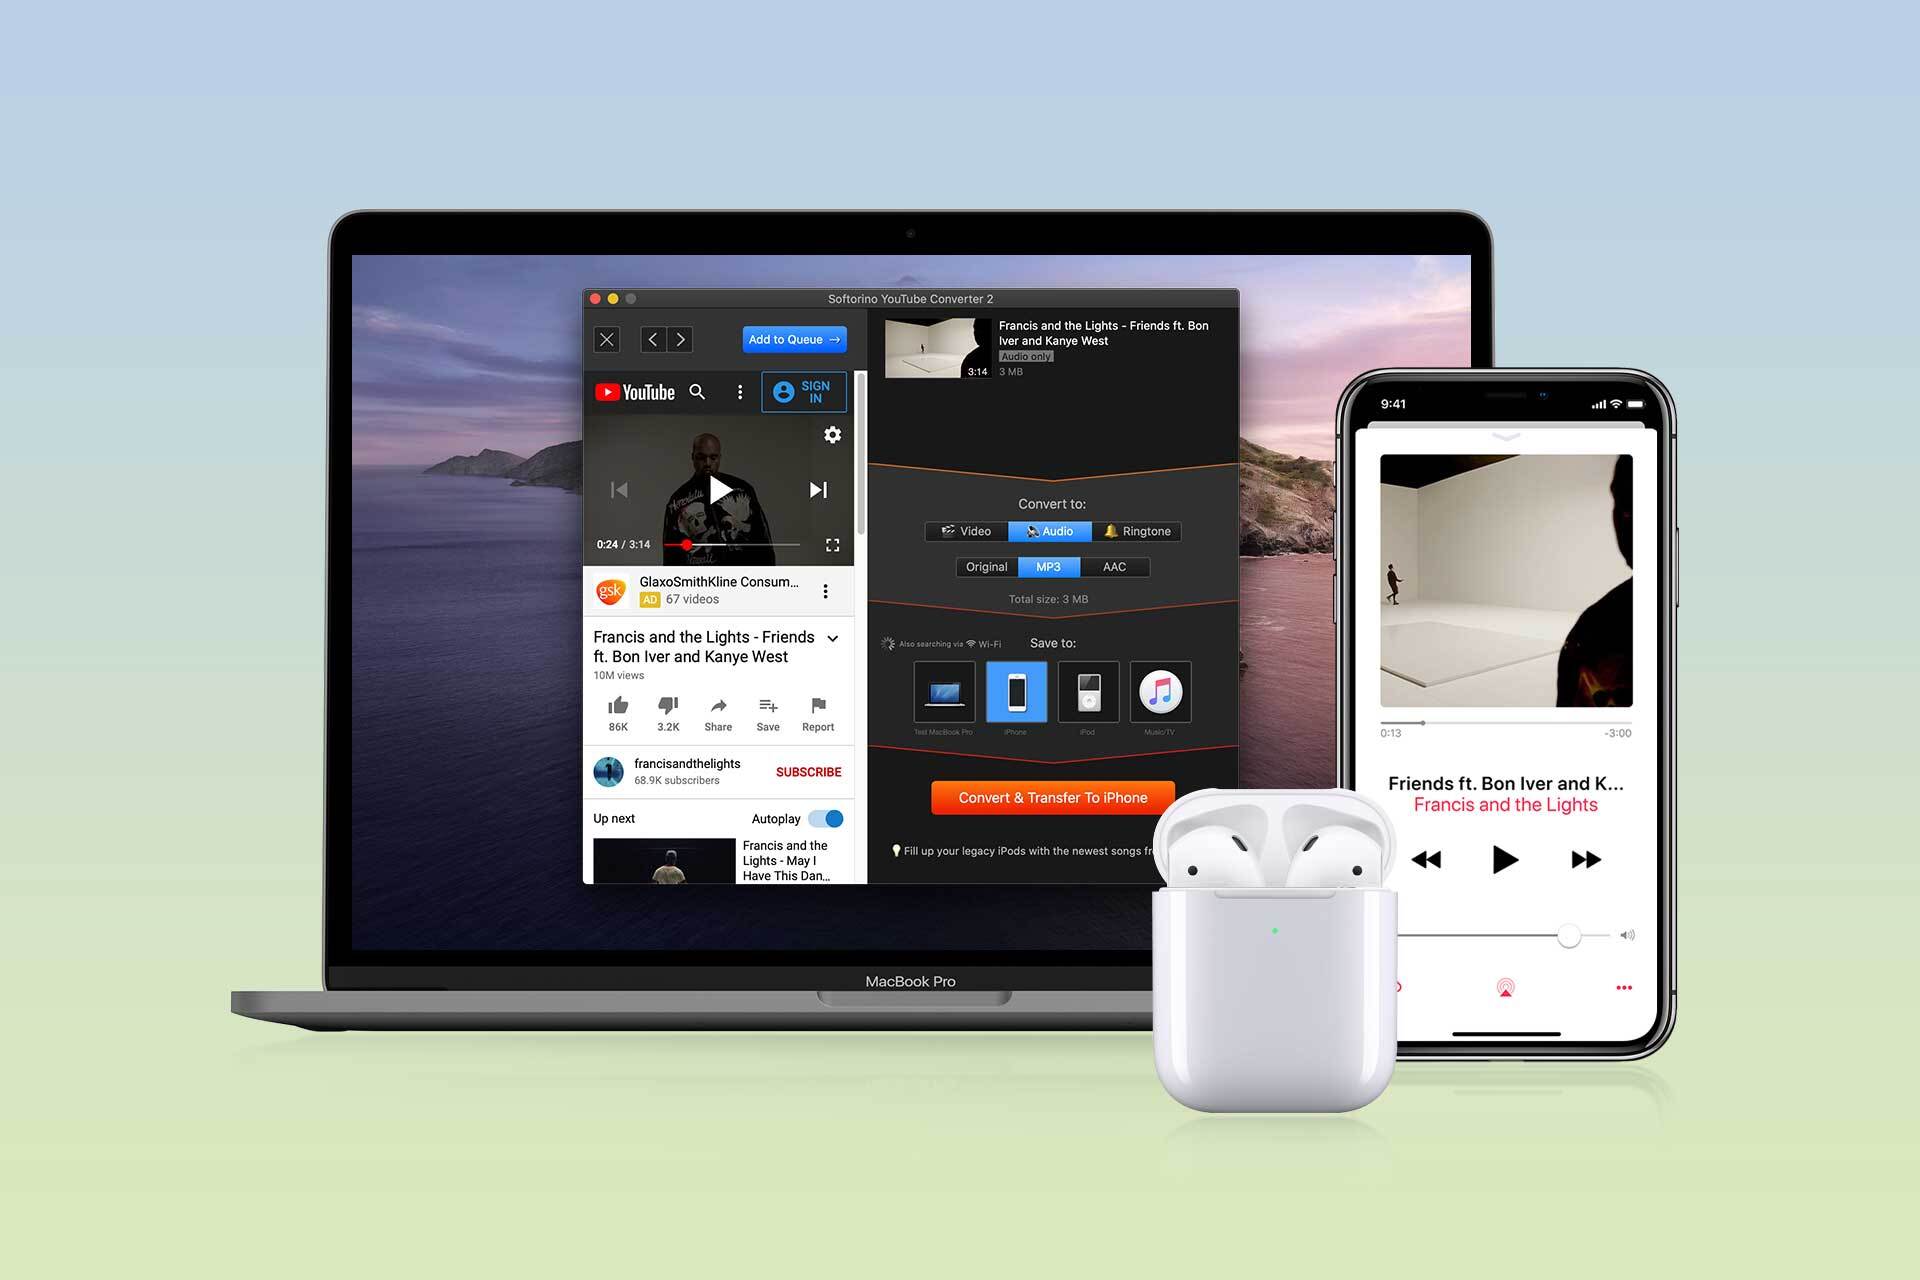 SYC helps listen to YouTube music offline